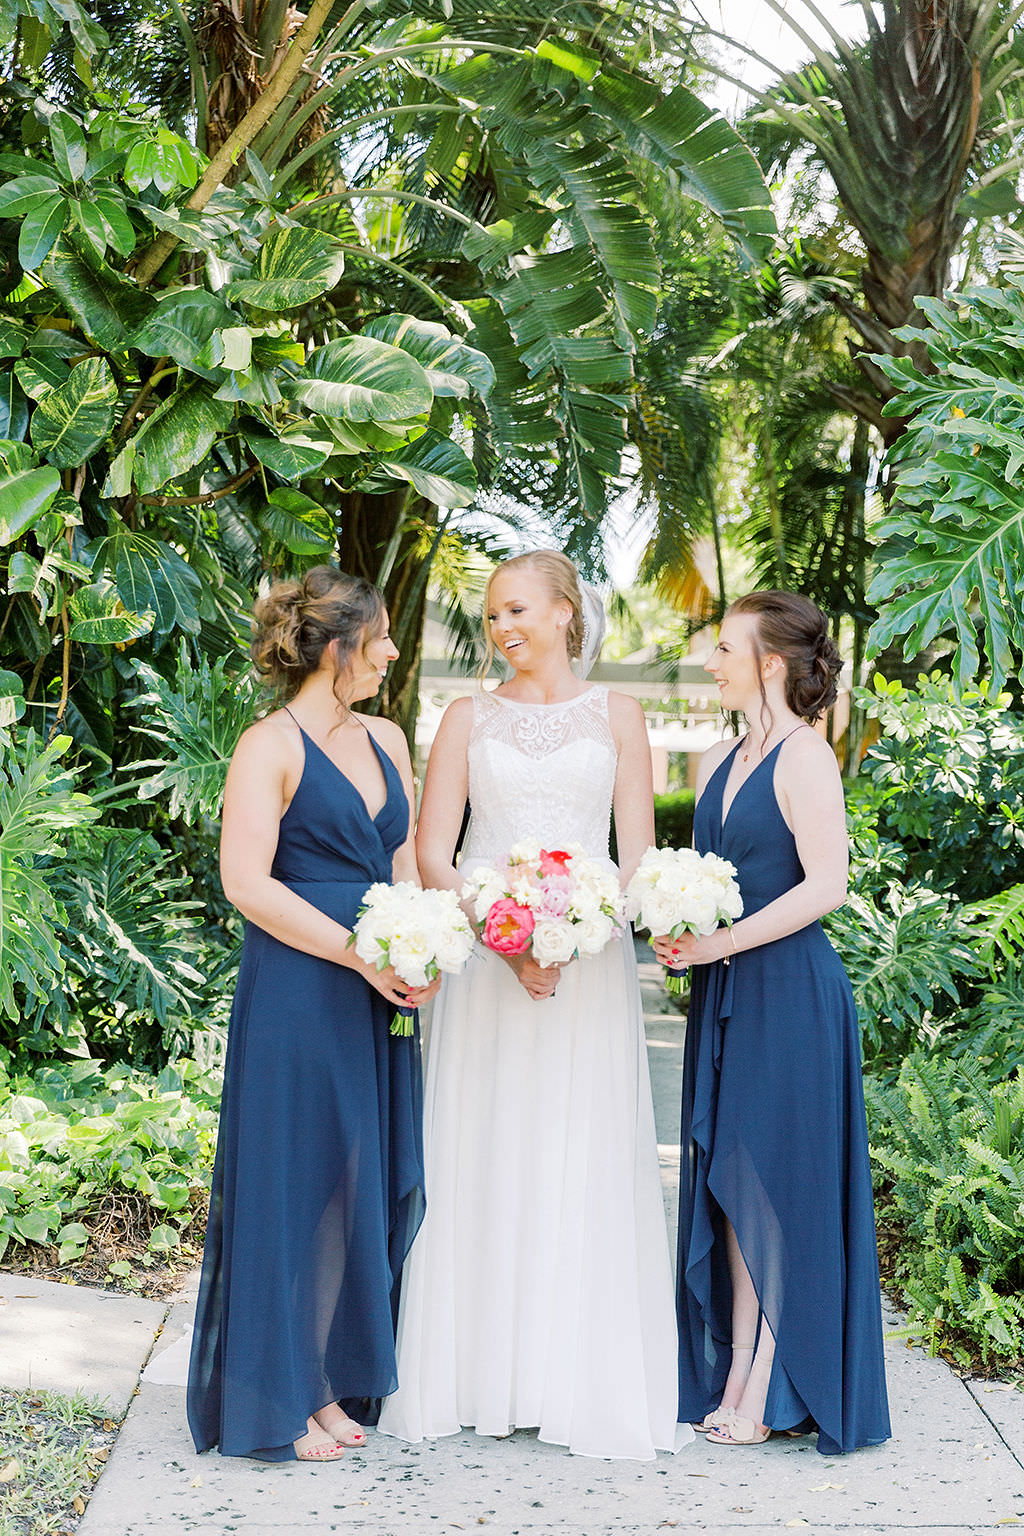 Tampa Bay Bride Wedding Portrait in Tropical Garden in High Illusion and Lace Crew Neck Neckline Wedding Dress with Colorful Pink and White Floral Bridal Bouquet with Bridesmaids in Navy Blue Matching Floor Length Jenny Yang Dresses Holding Ivory Flower Bouquets